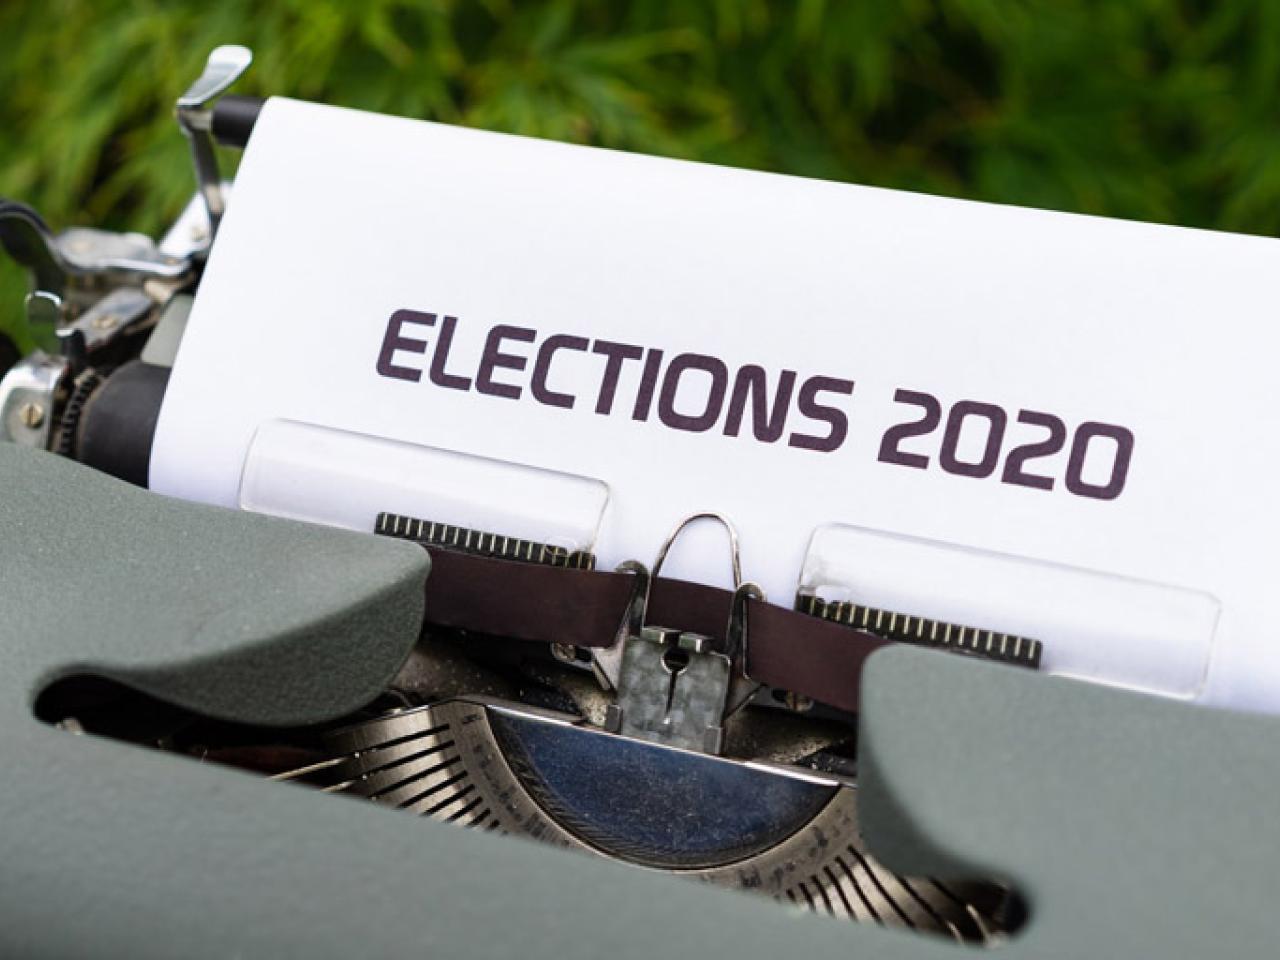 Outside, a gray manual typewriter. A sheet of paper in the typewriter reads “Elections 2020” in all capital letters.